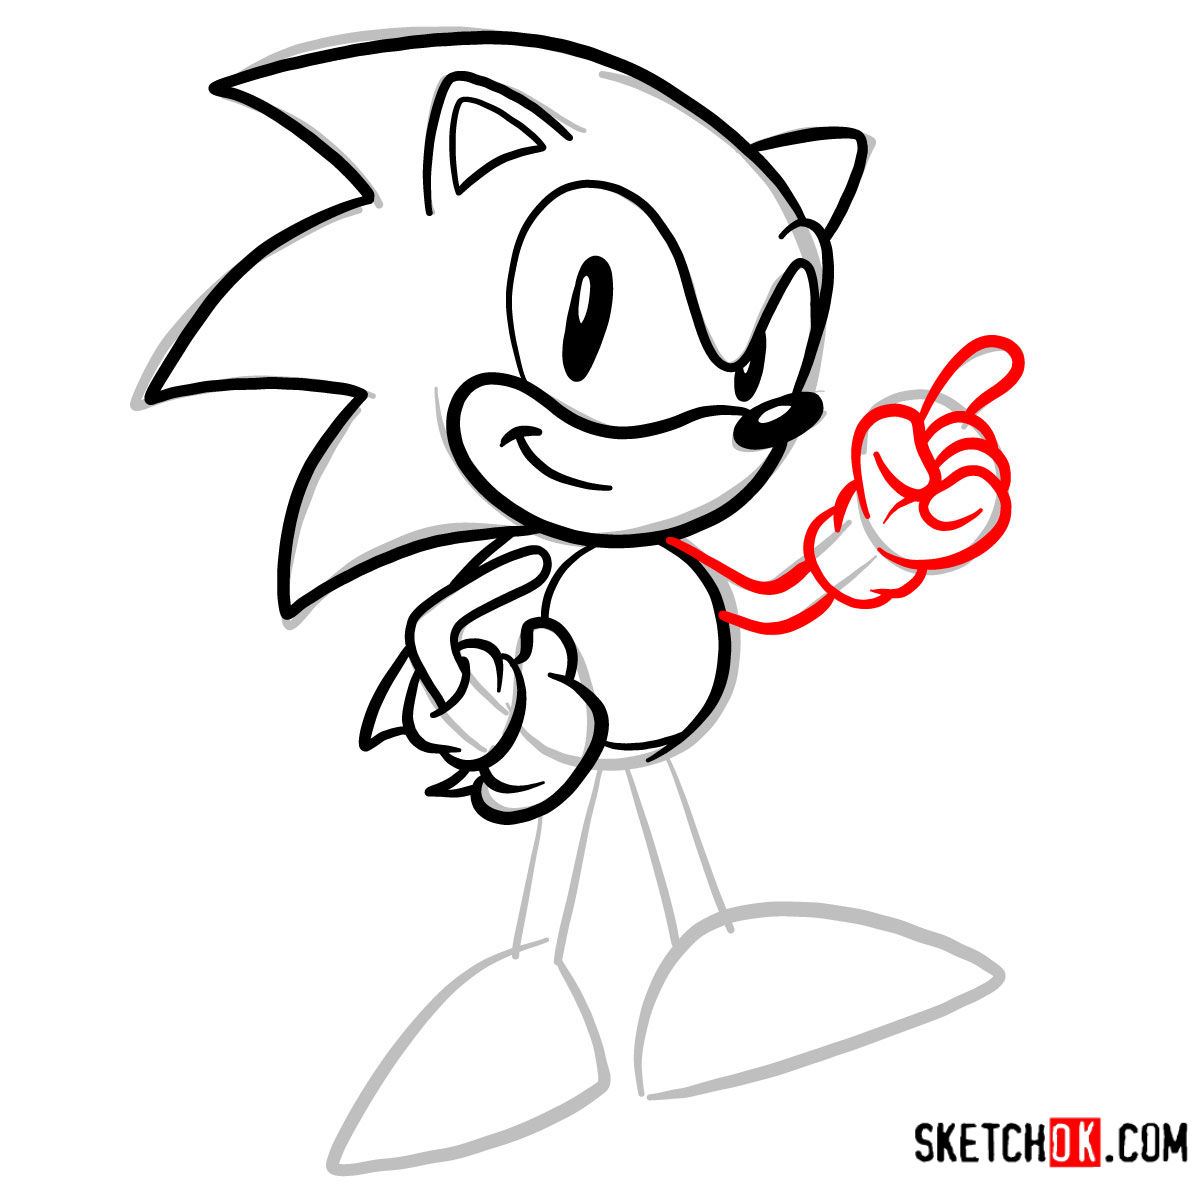 How to draw Sonic the Hedgehog SEGA games style - step 06